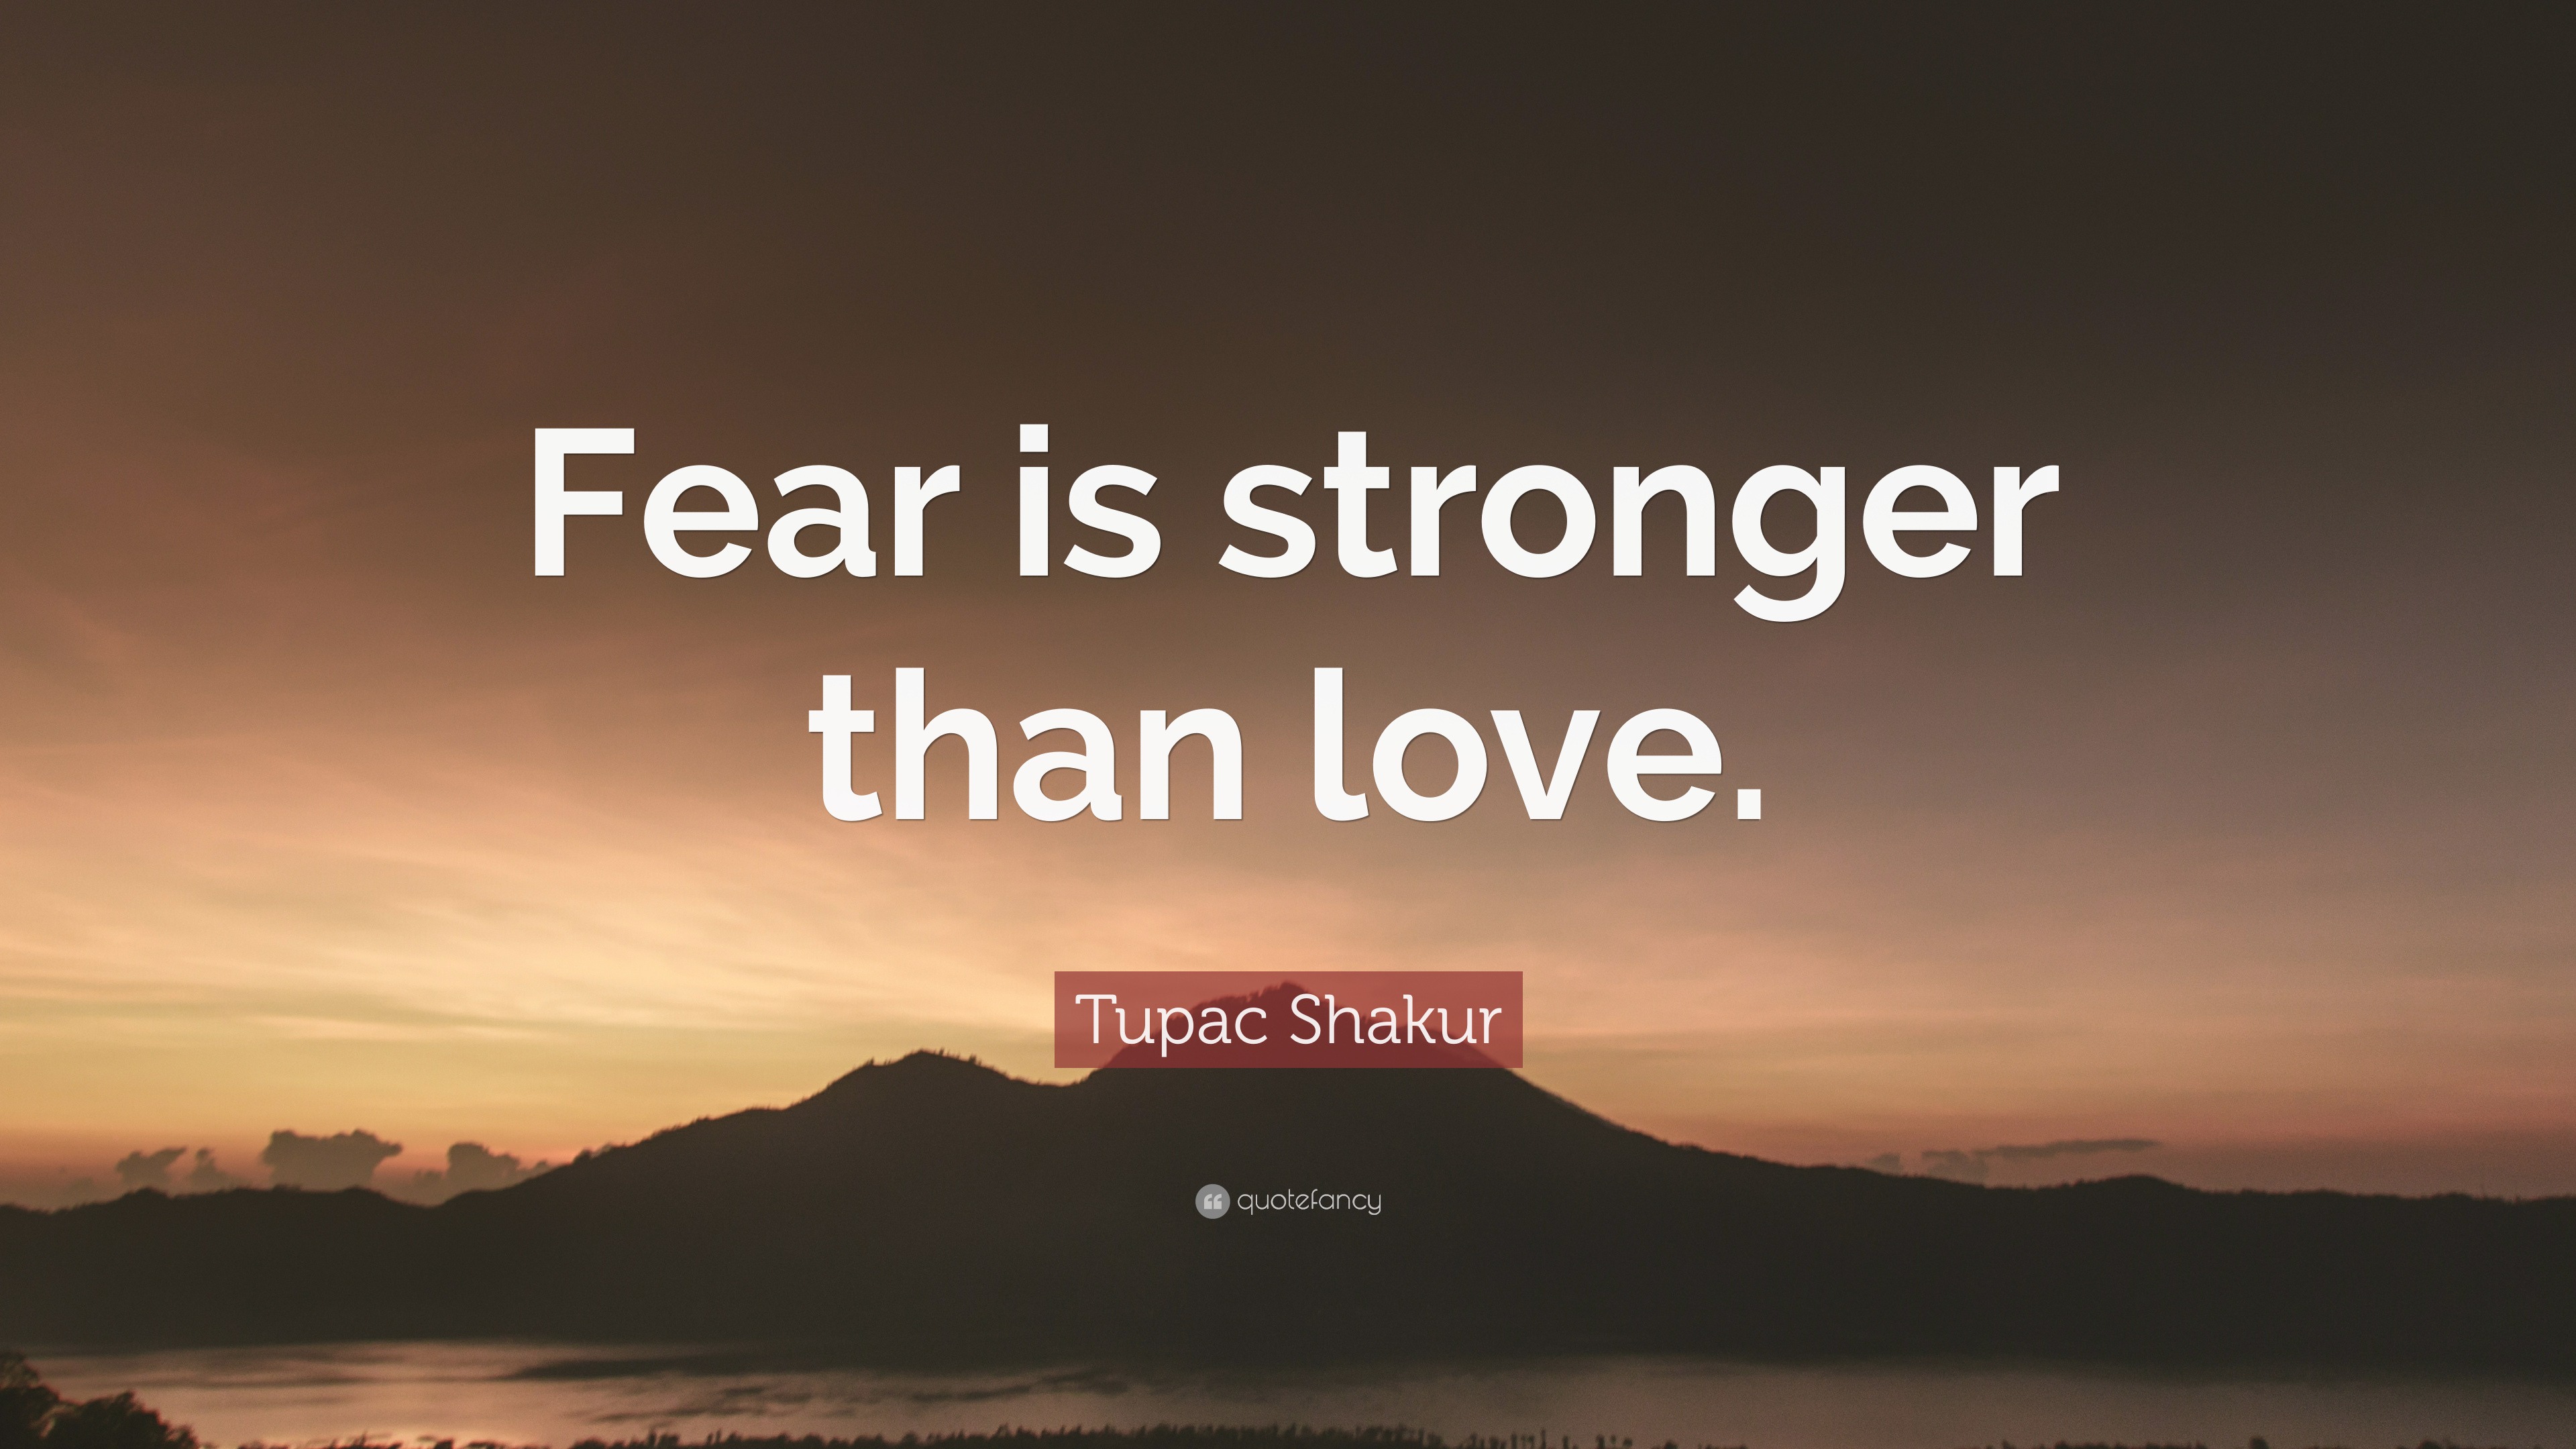 Tupac Shakur Quote “Fear is stronger than love ”